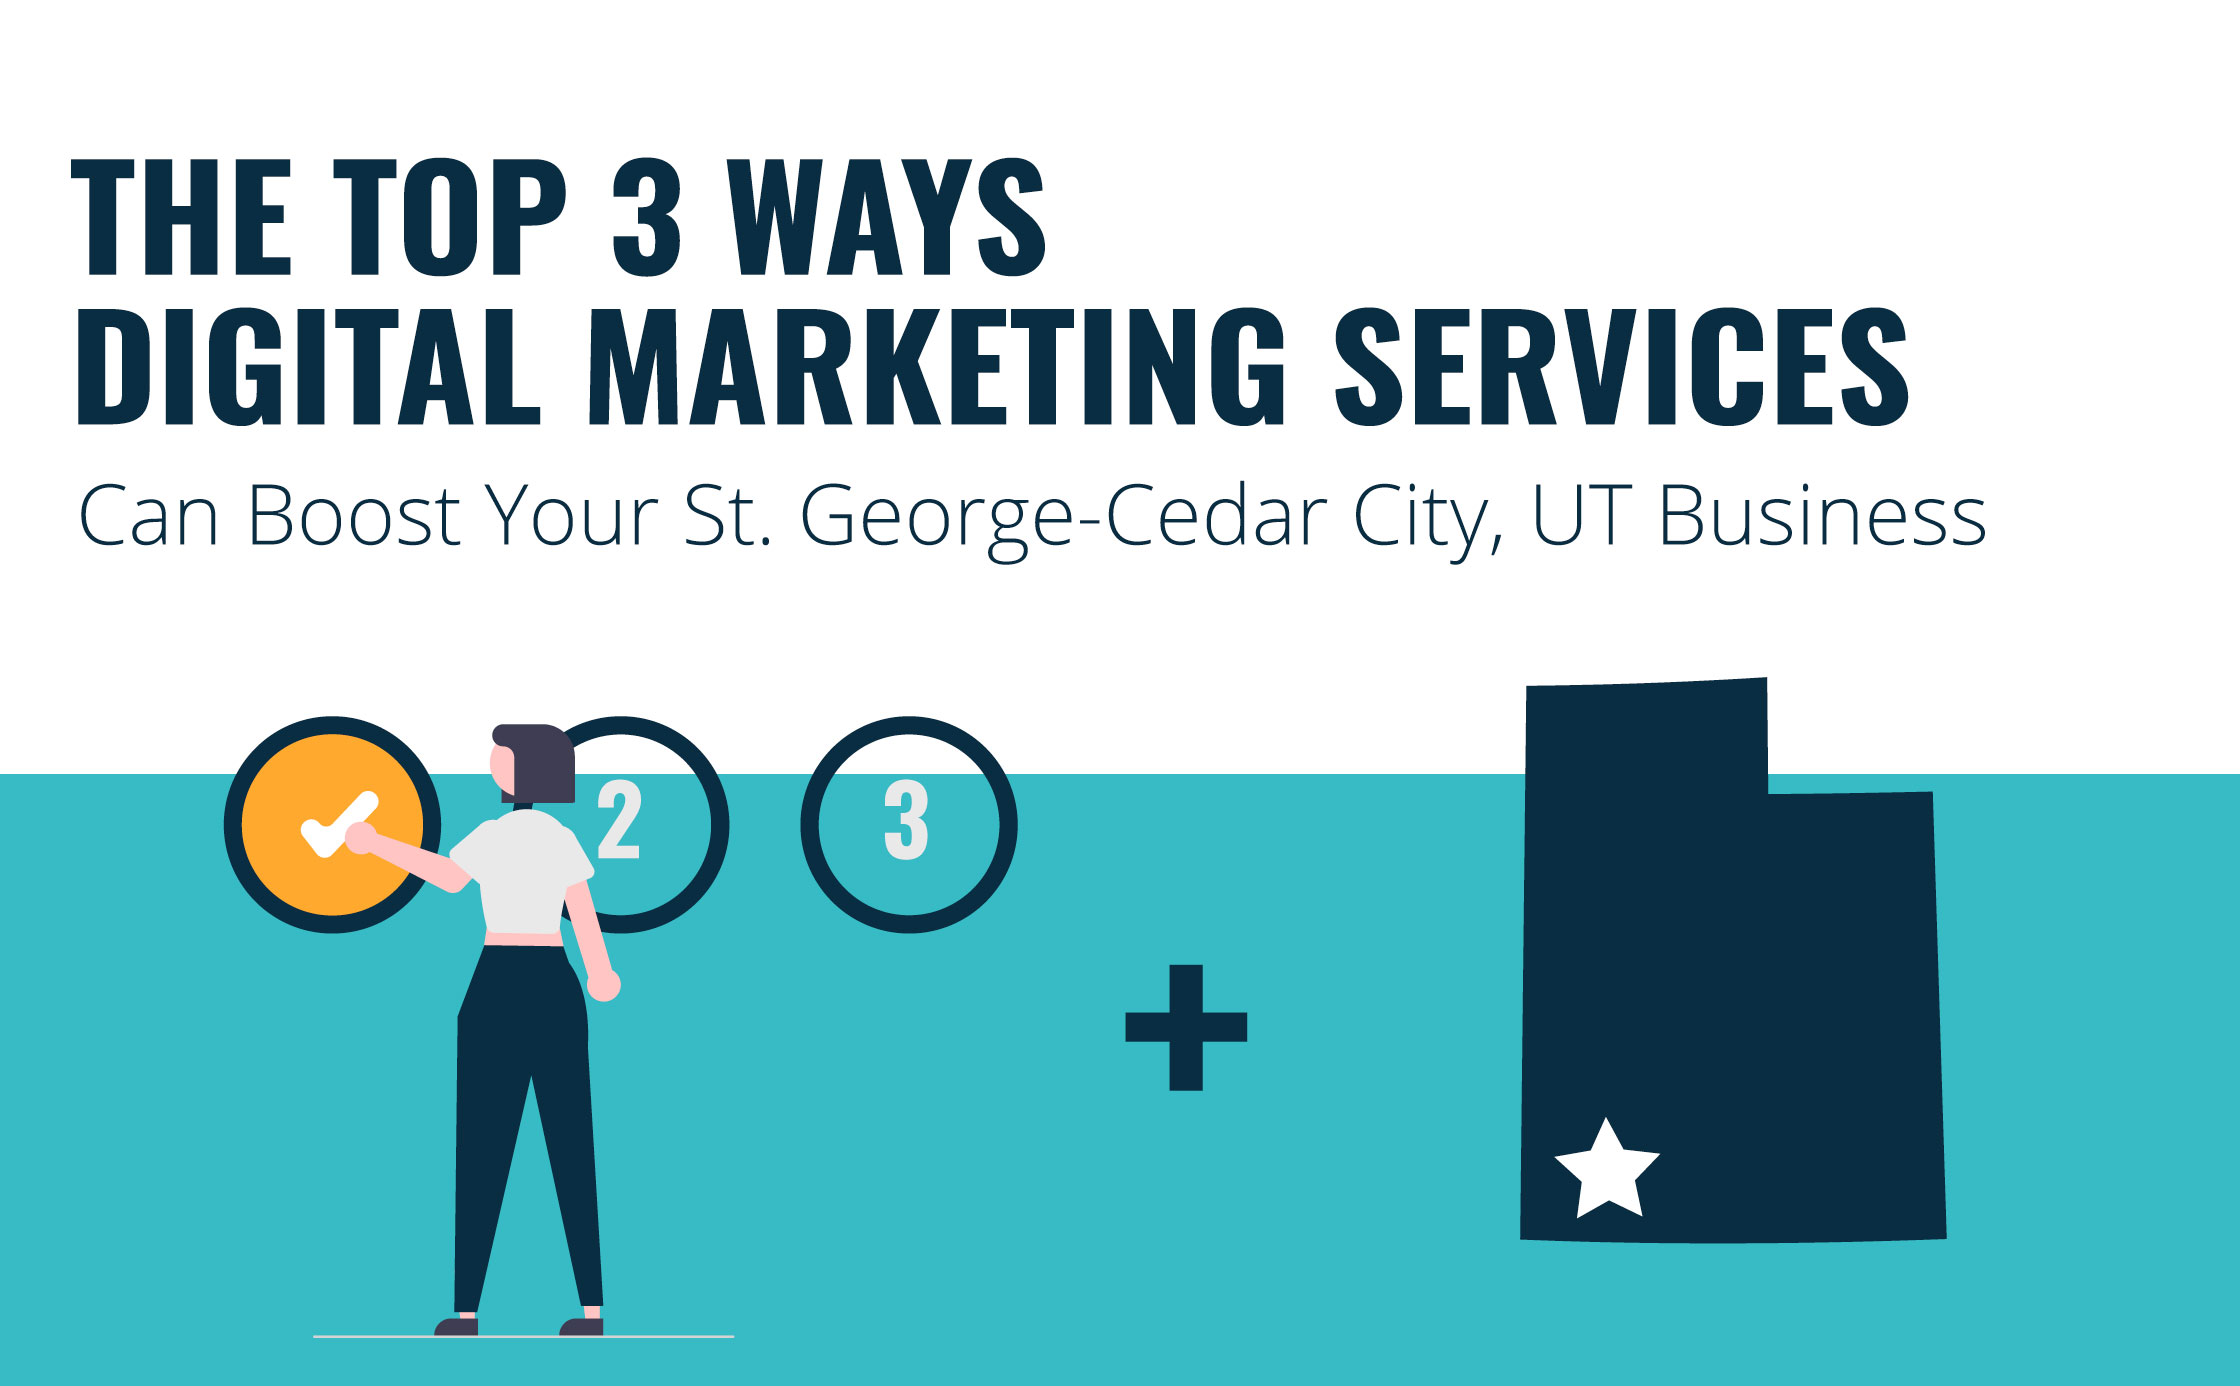 Top 3 Ways Digital Marketing Services Can Boost Your St. George-Cedar City, UT Business